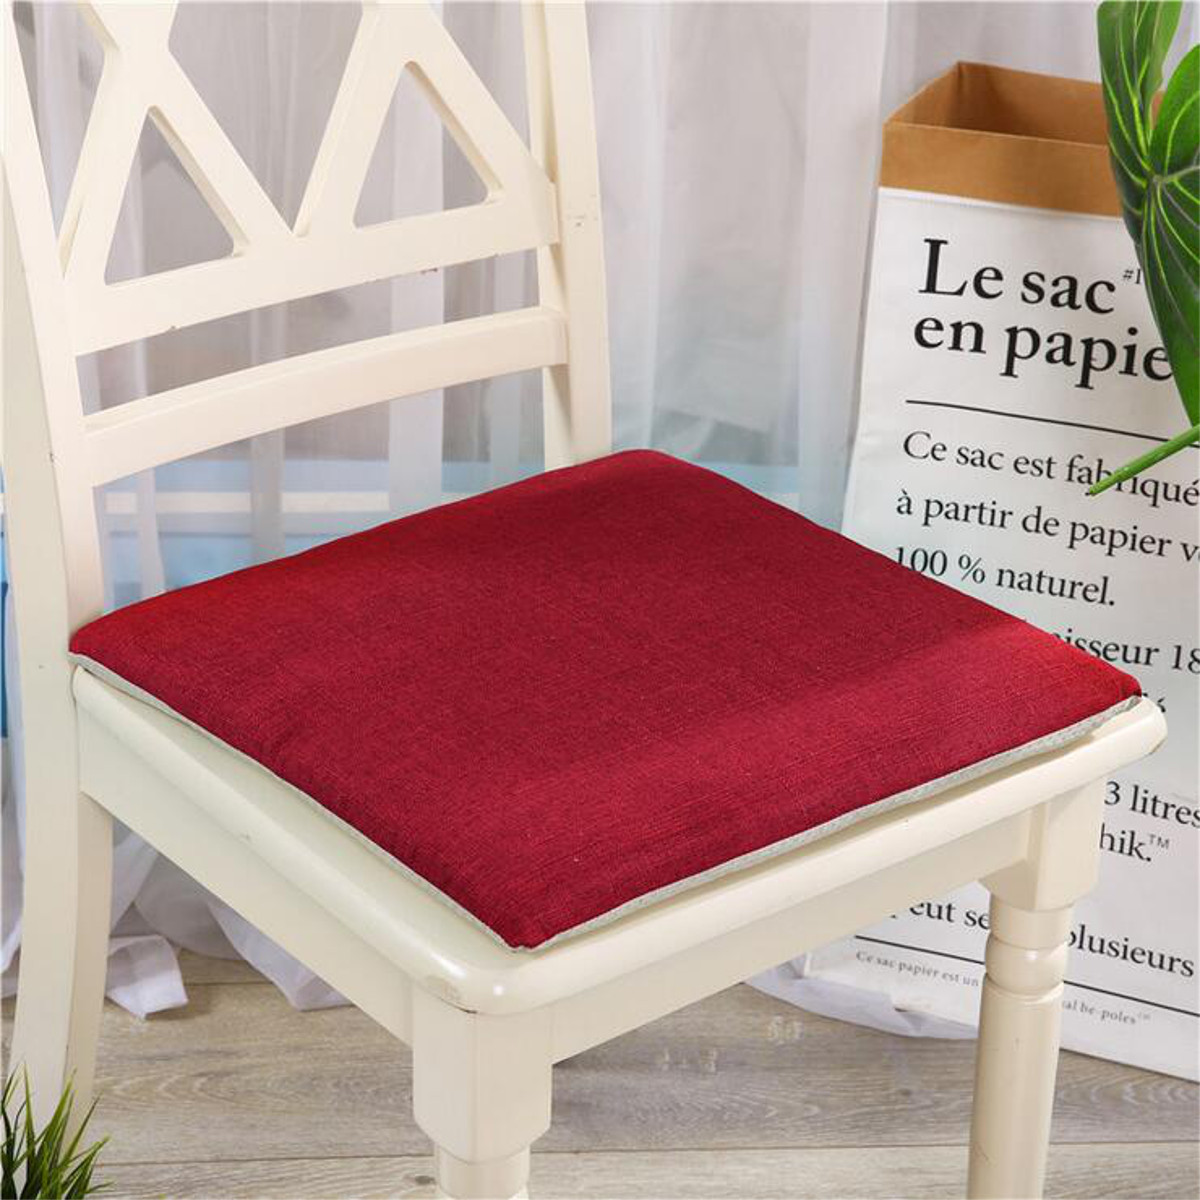 IVYSHION Chair Pad Cushion Natural,Candy Colors Kitchen Seat Cushion Pads Deep Large Square Garden Furniture Chair Cushion Seat Pad For Garden Armchair 